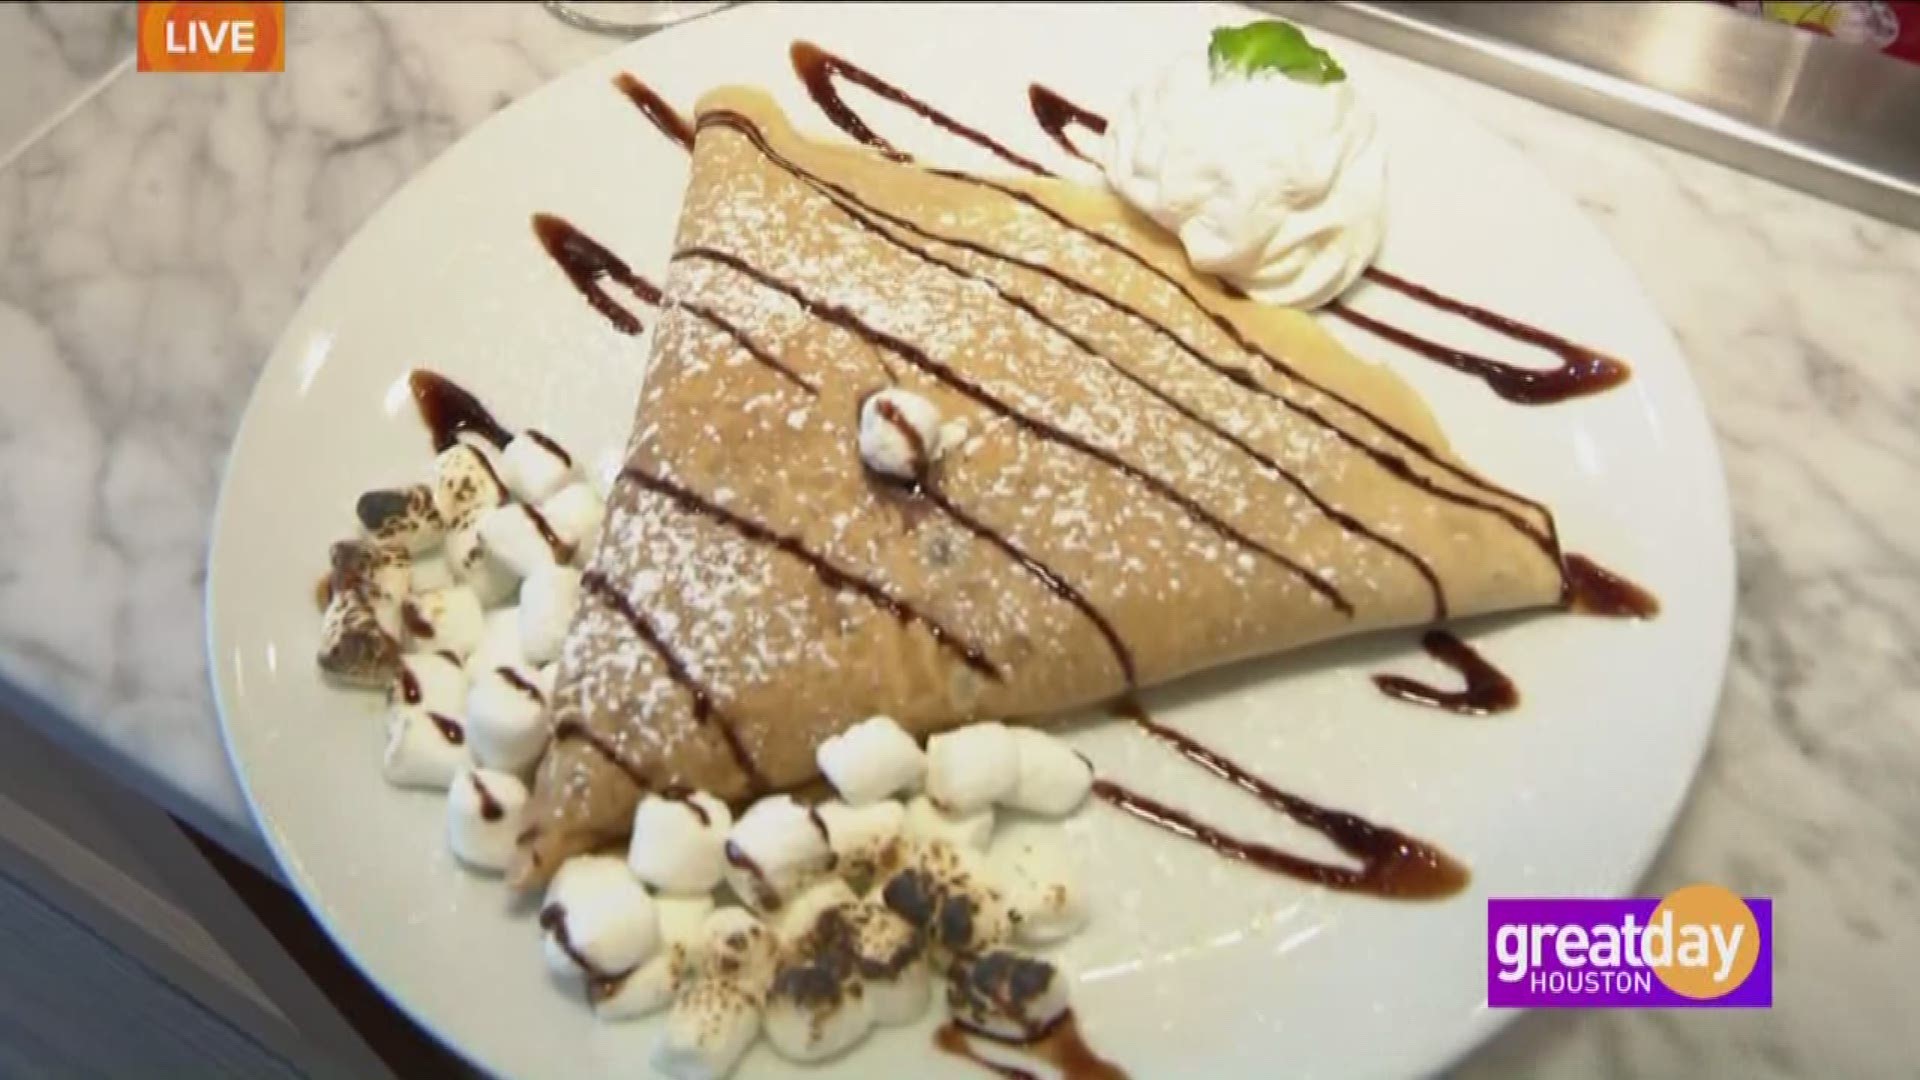 Two of Houston's favorite sweet spots come together for a good cause!  Sweet Paris and Cacao collaborate on a crepe to give back to the Houston Food Bank.